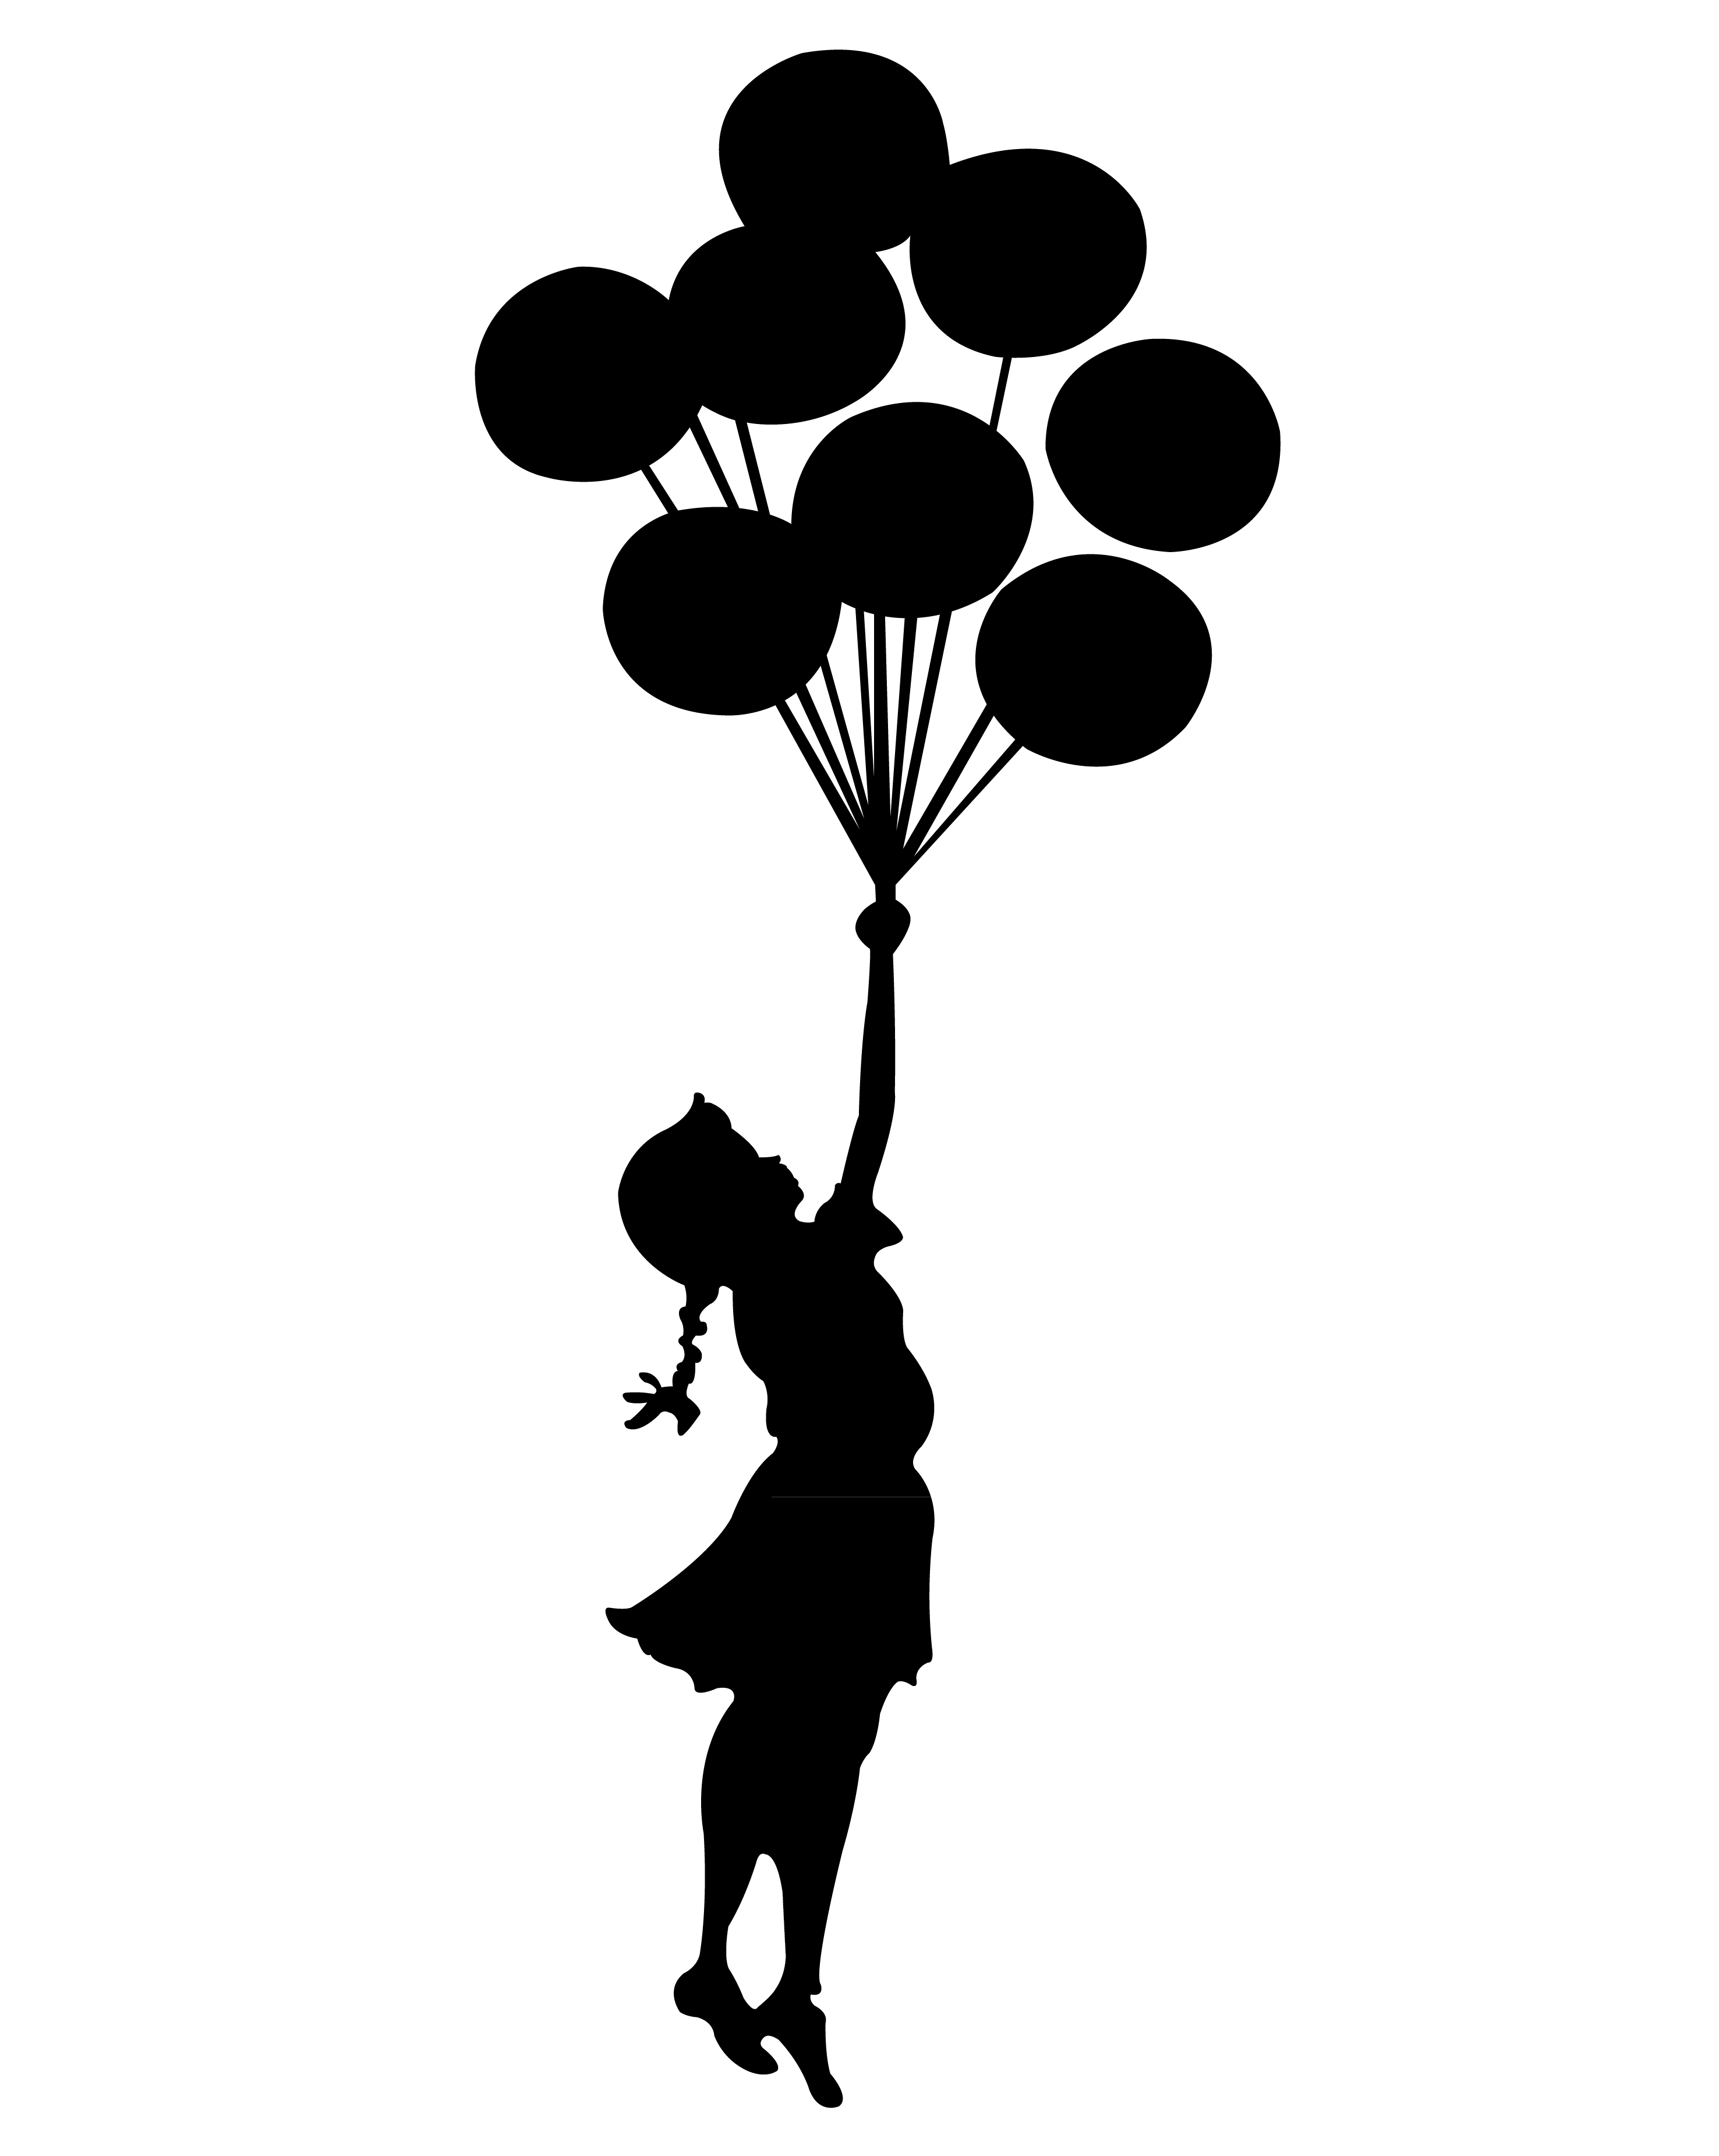 Girl holding at getdrawings. Clipart balloon silhouette